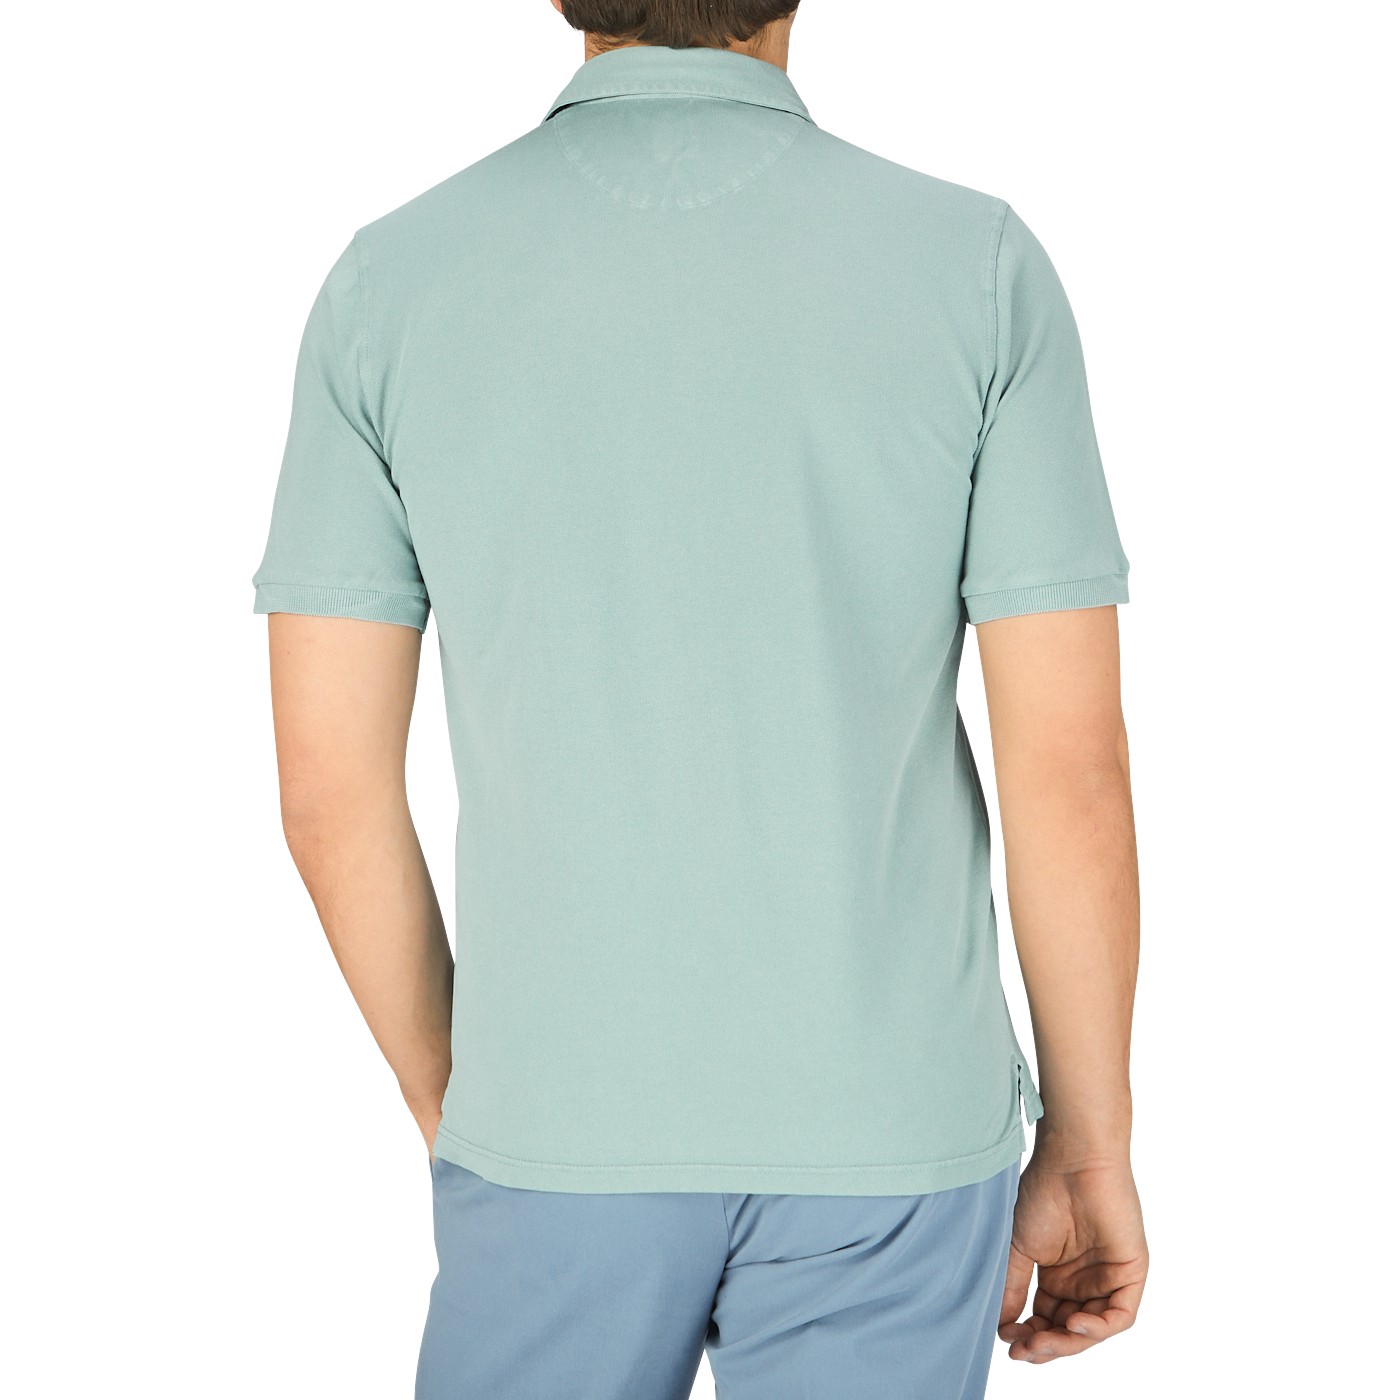 The back view of a man wearing a Fedeli Washed Light Green Cotton Pique Polo Shirt.